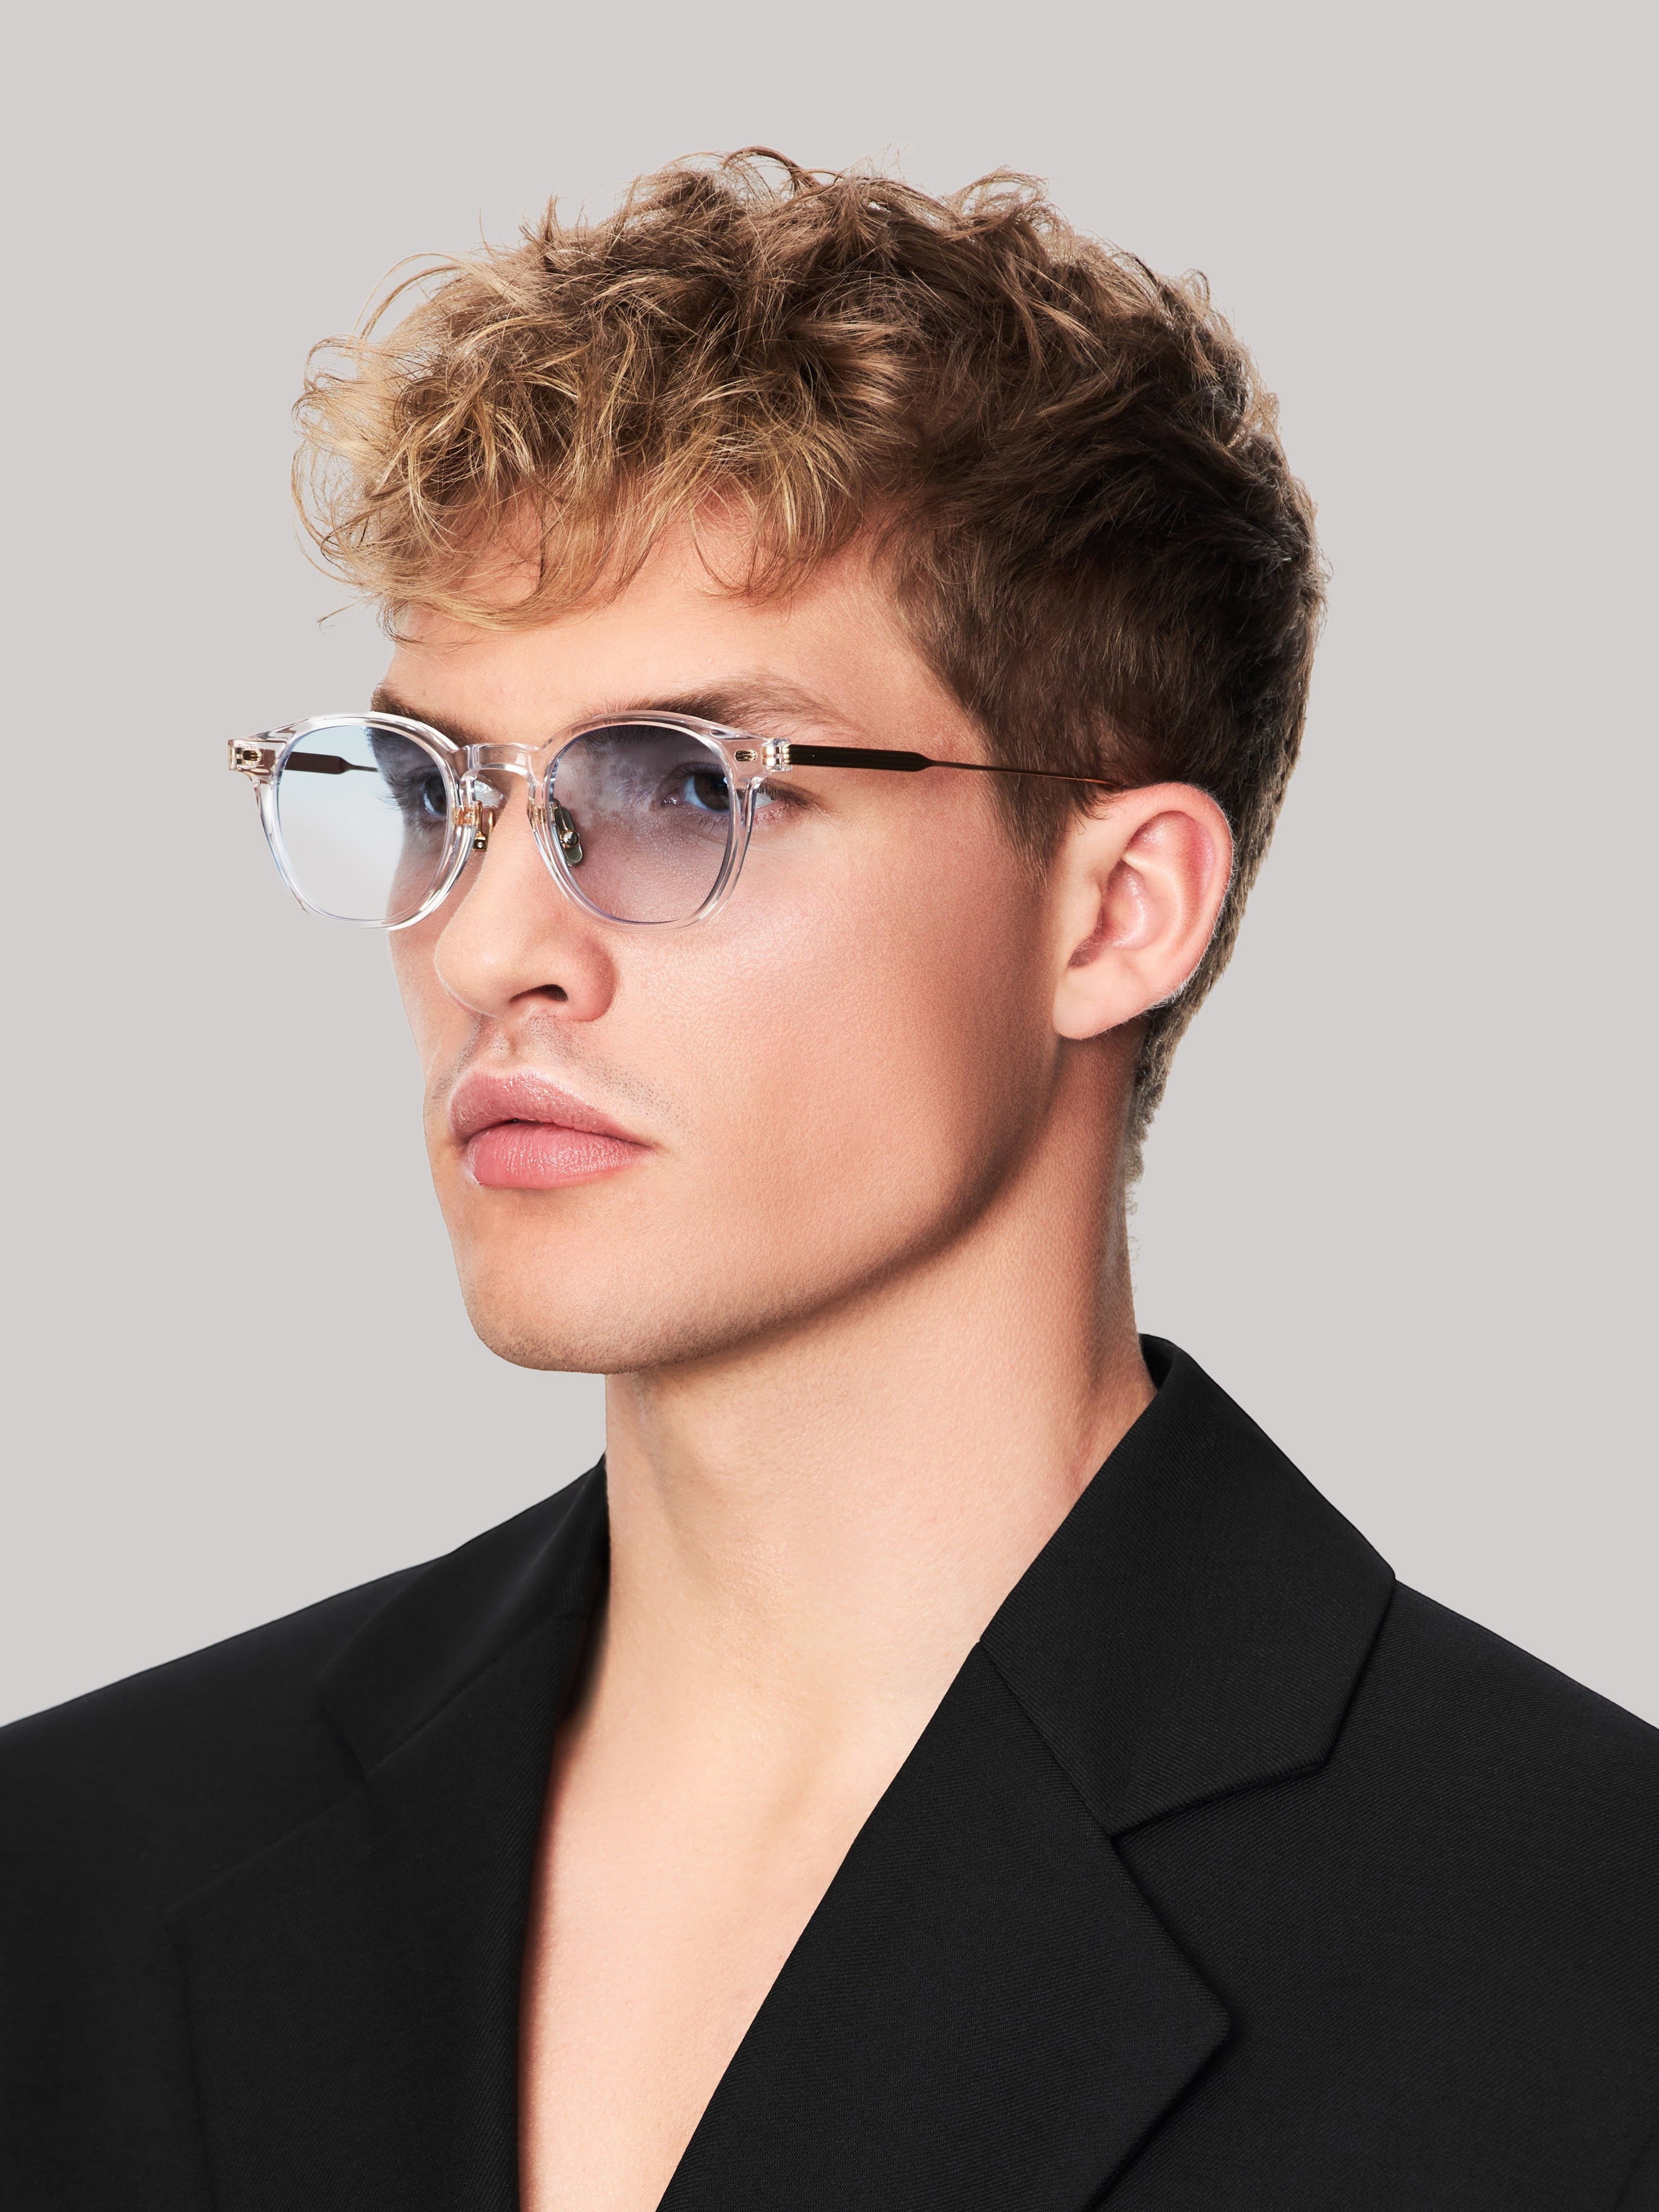 Designer Sunglasses by Naruto Nagata. Explore Naruto Nagata online. Exclusive collections of designer sunglasses. The latest Naruto Nagata sunglasses, limited collections and accessories. Shop Now. Shop Best Sellers.